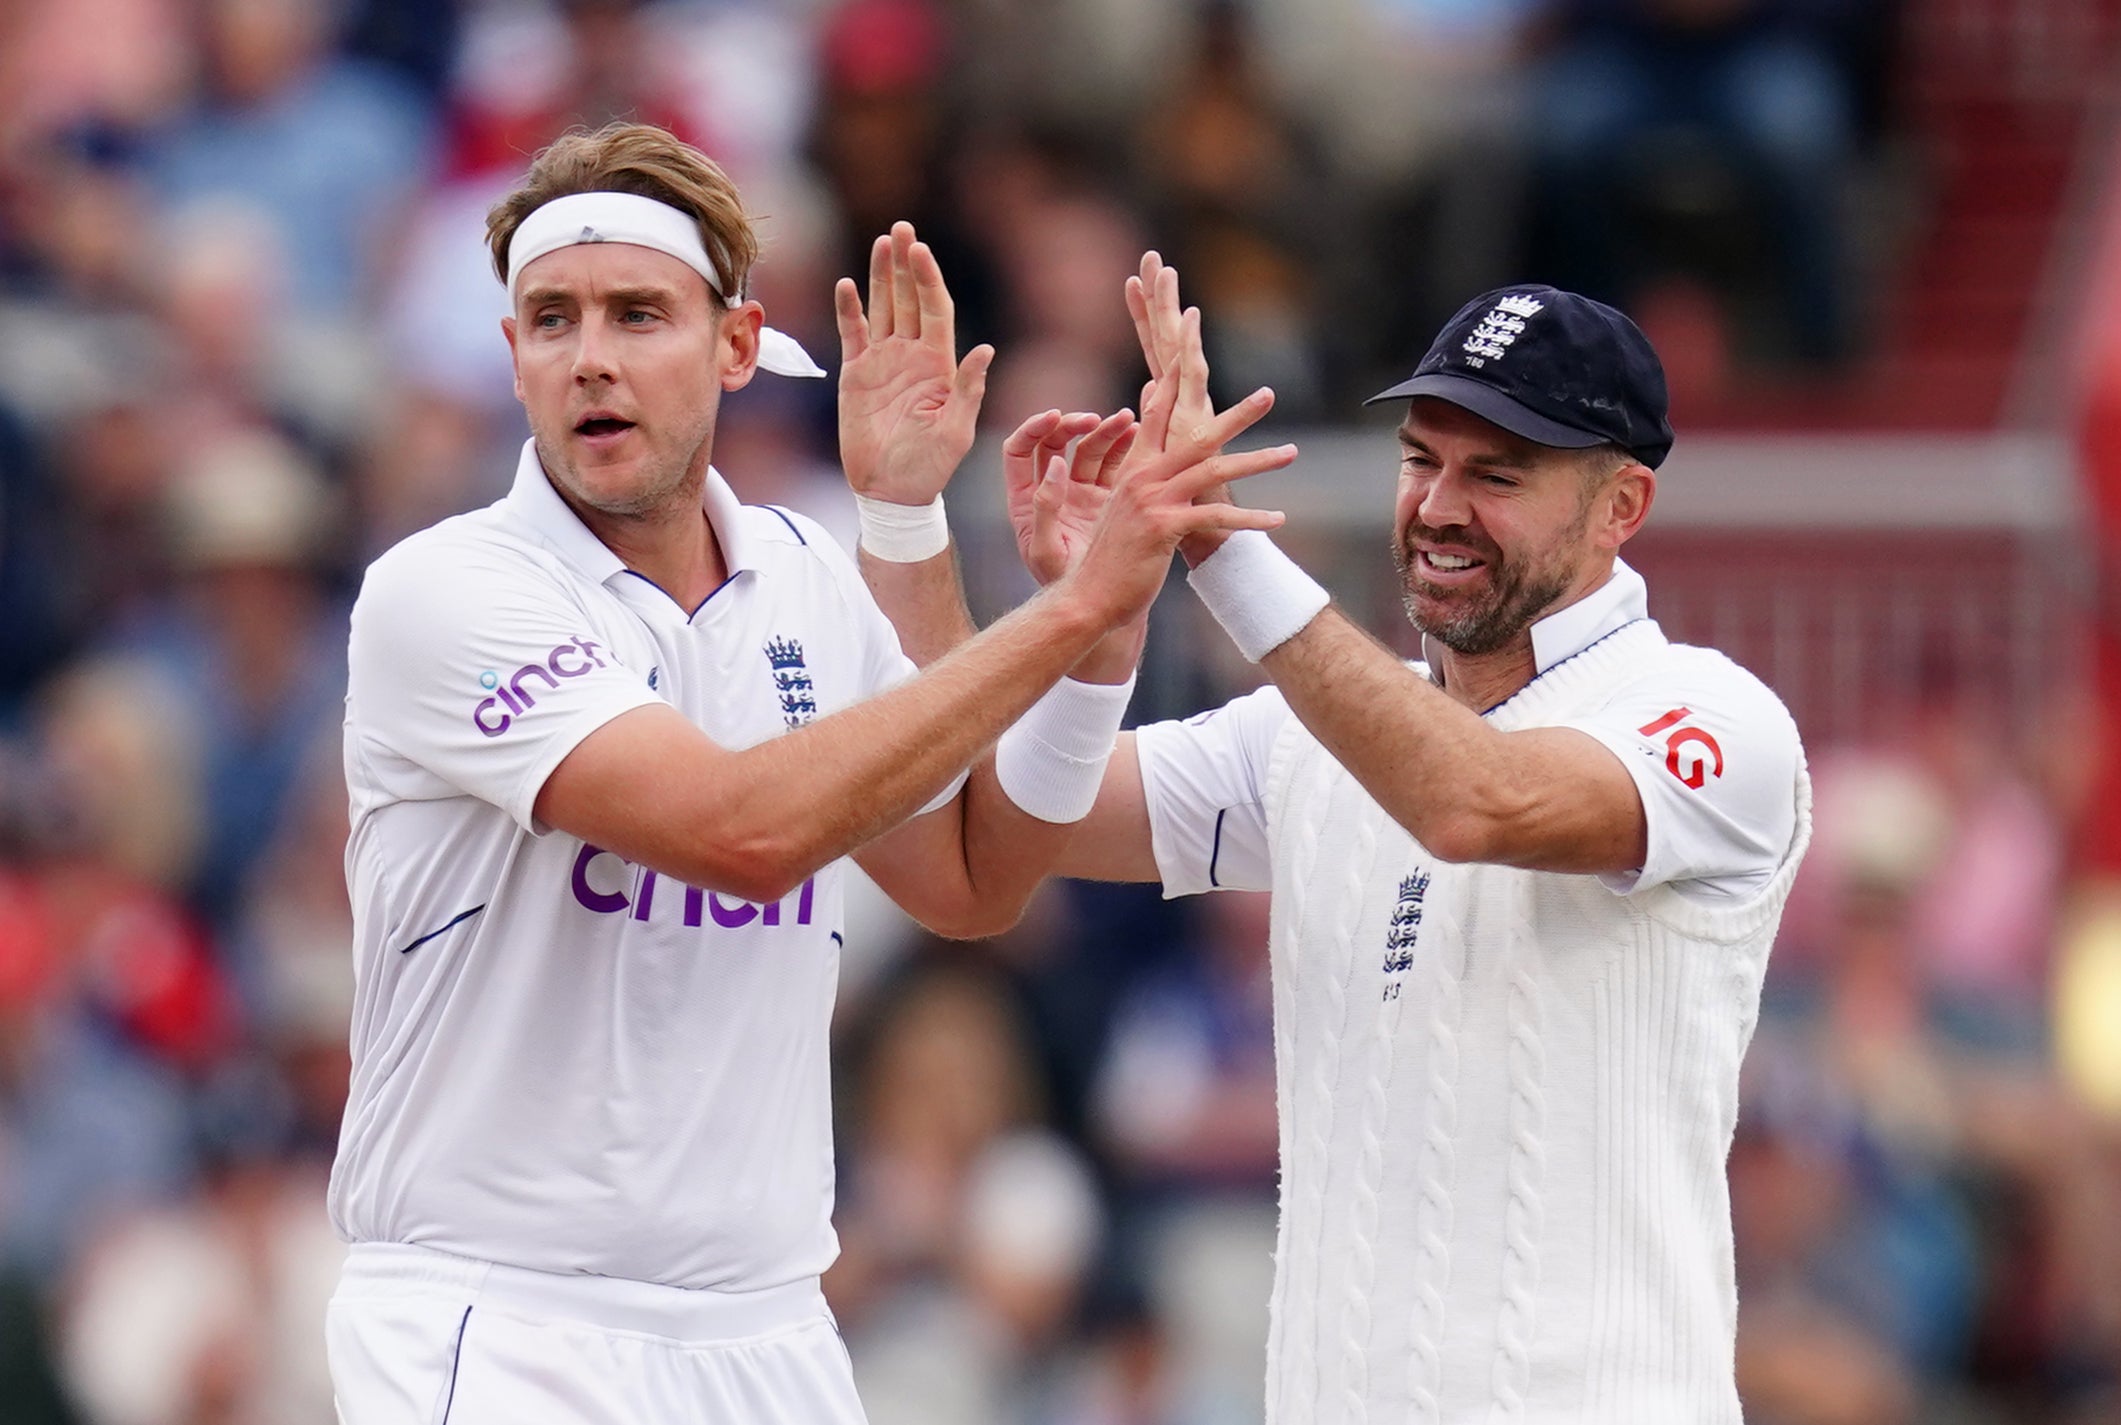 england cricket, jonny bairstow, ben foakes, jack leach, ben stokes, brendon mccullum, england shake up test squad as bairstow among those dropped for three uncapped players